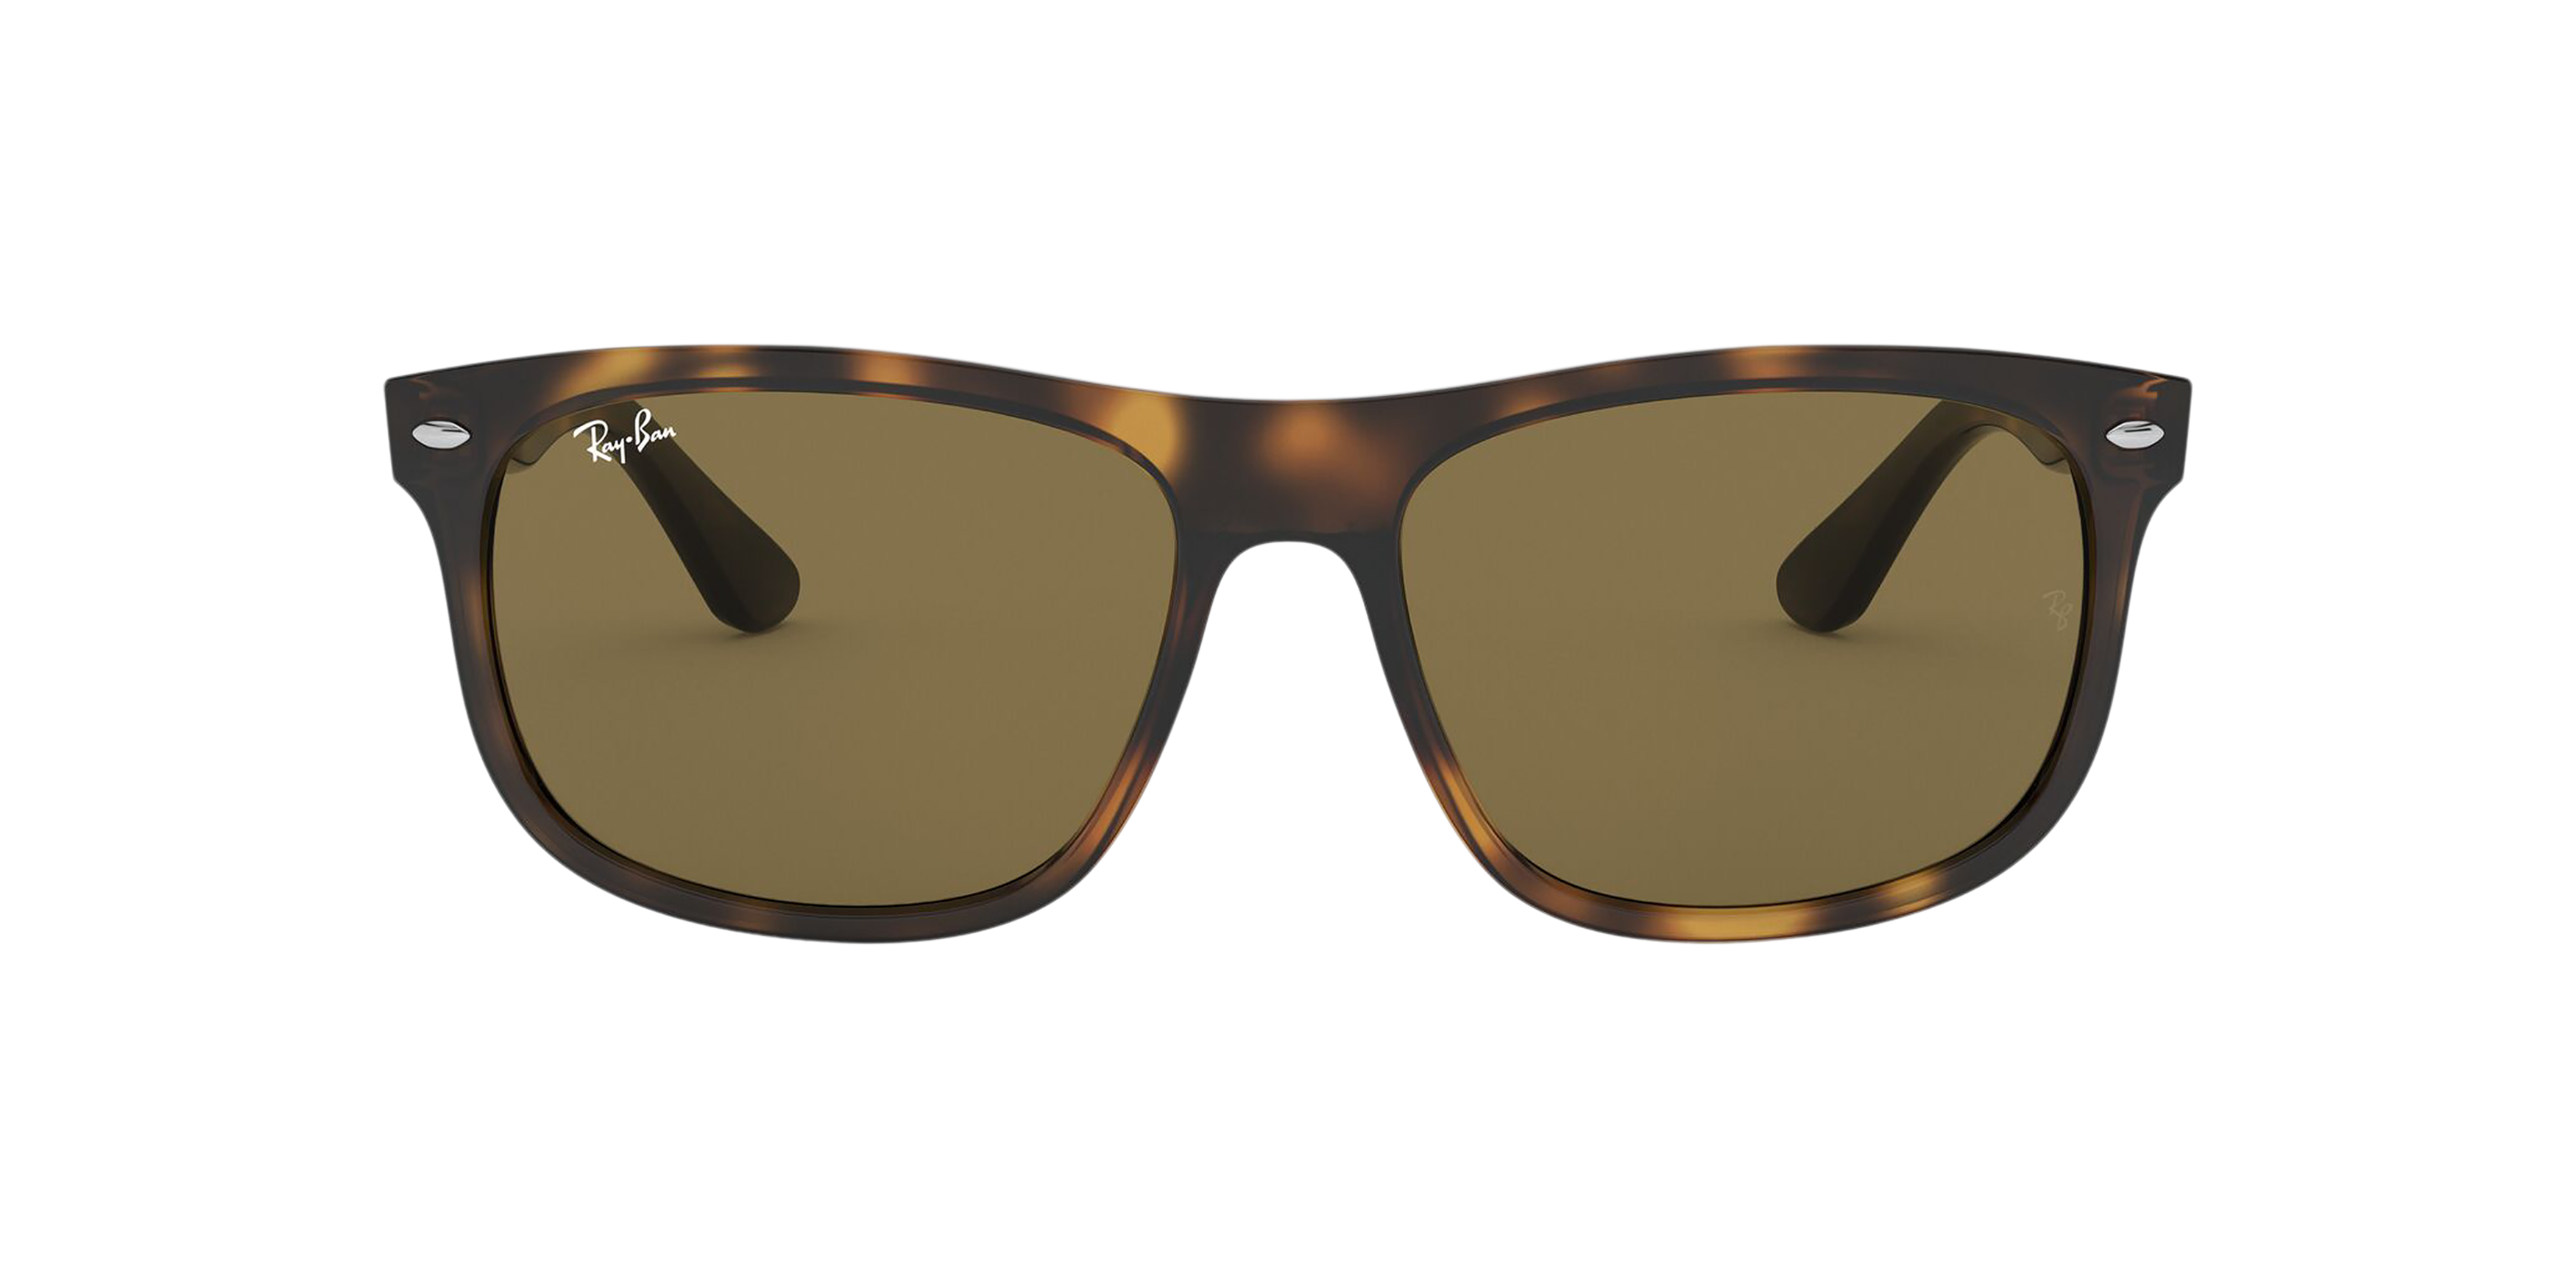 [products.image.front] Ray-Ban RB4226 710/73